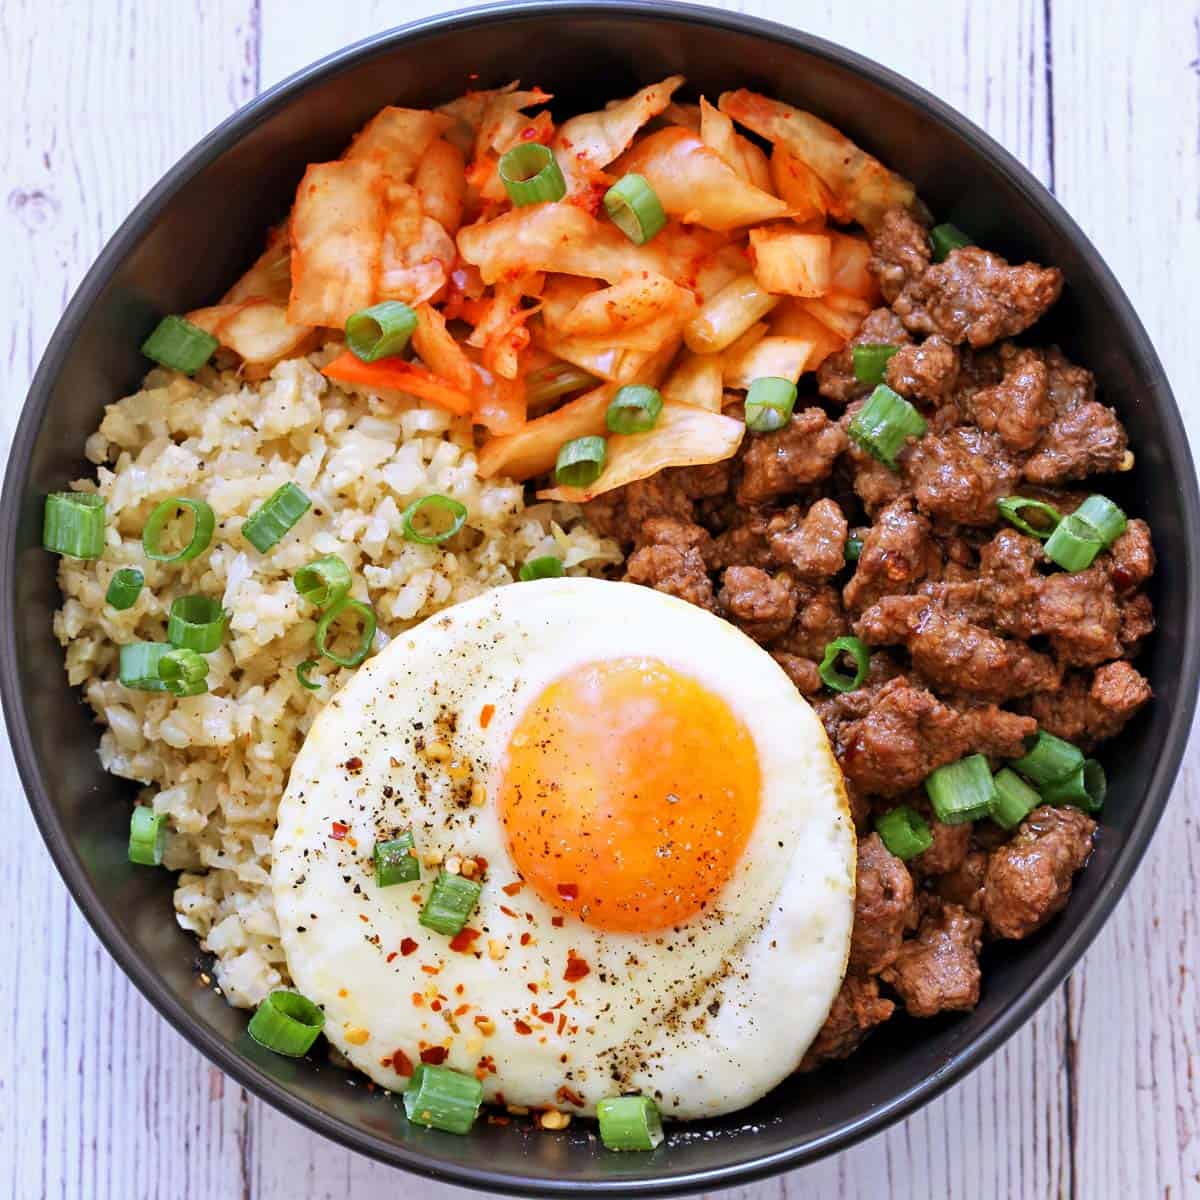 A serving suggestion for Korean ground beef: serve it in a bowl with cauliflower rice, kimchi, a fried egg, and scallions.